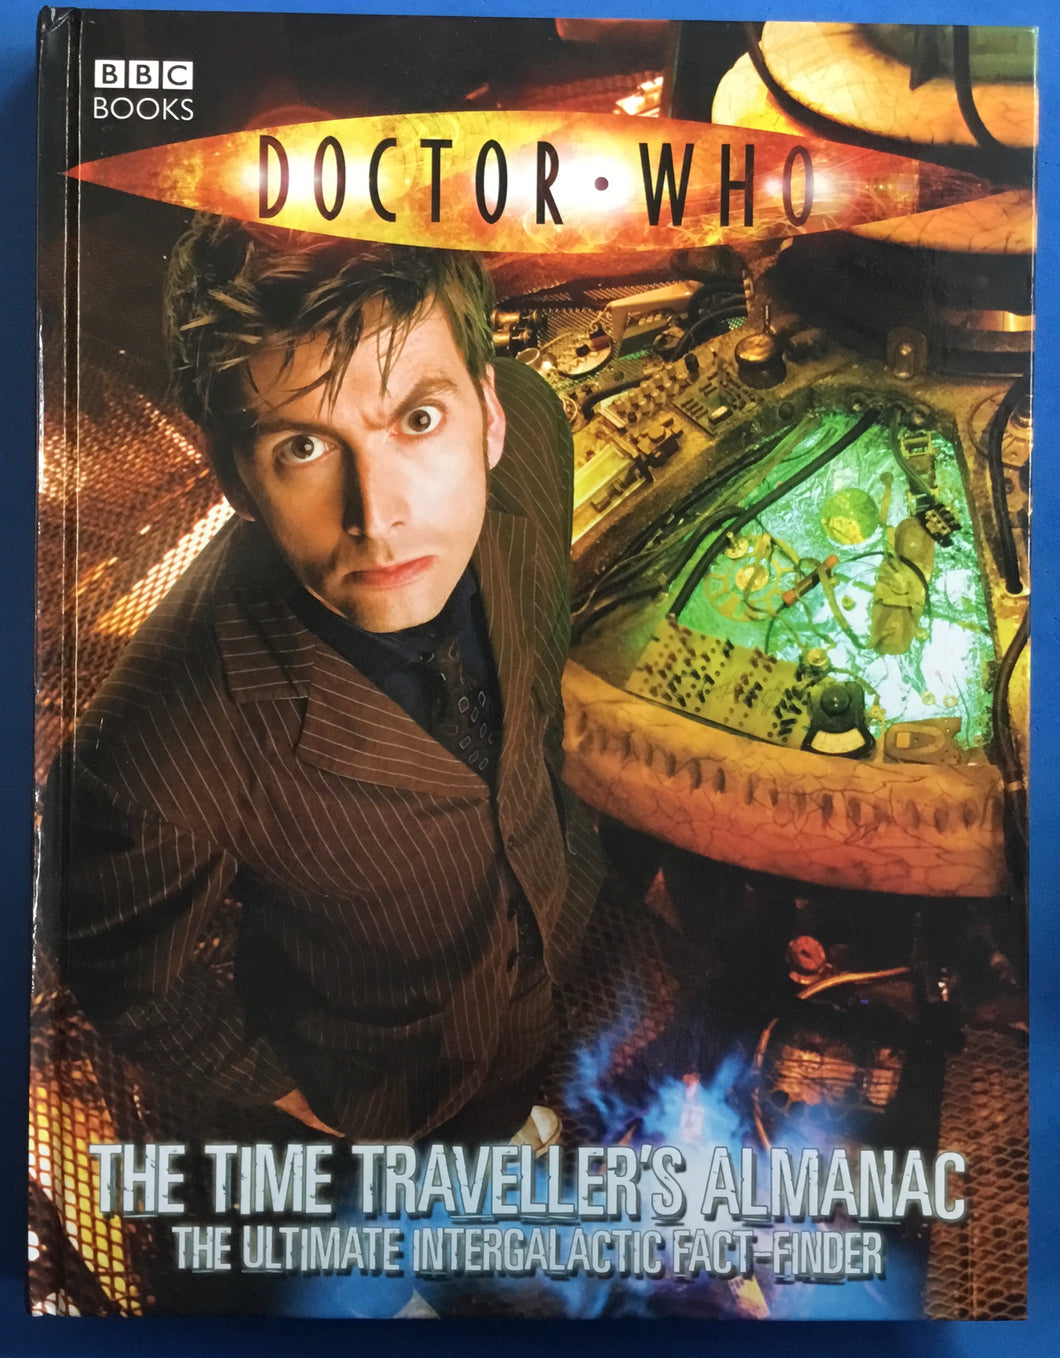 Doctor Who The Time Traveller’s Almanac 2008 BBC Books